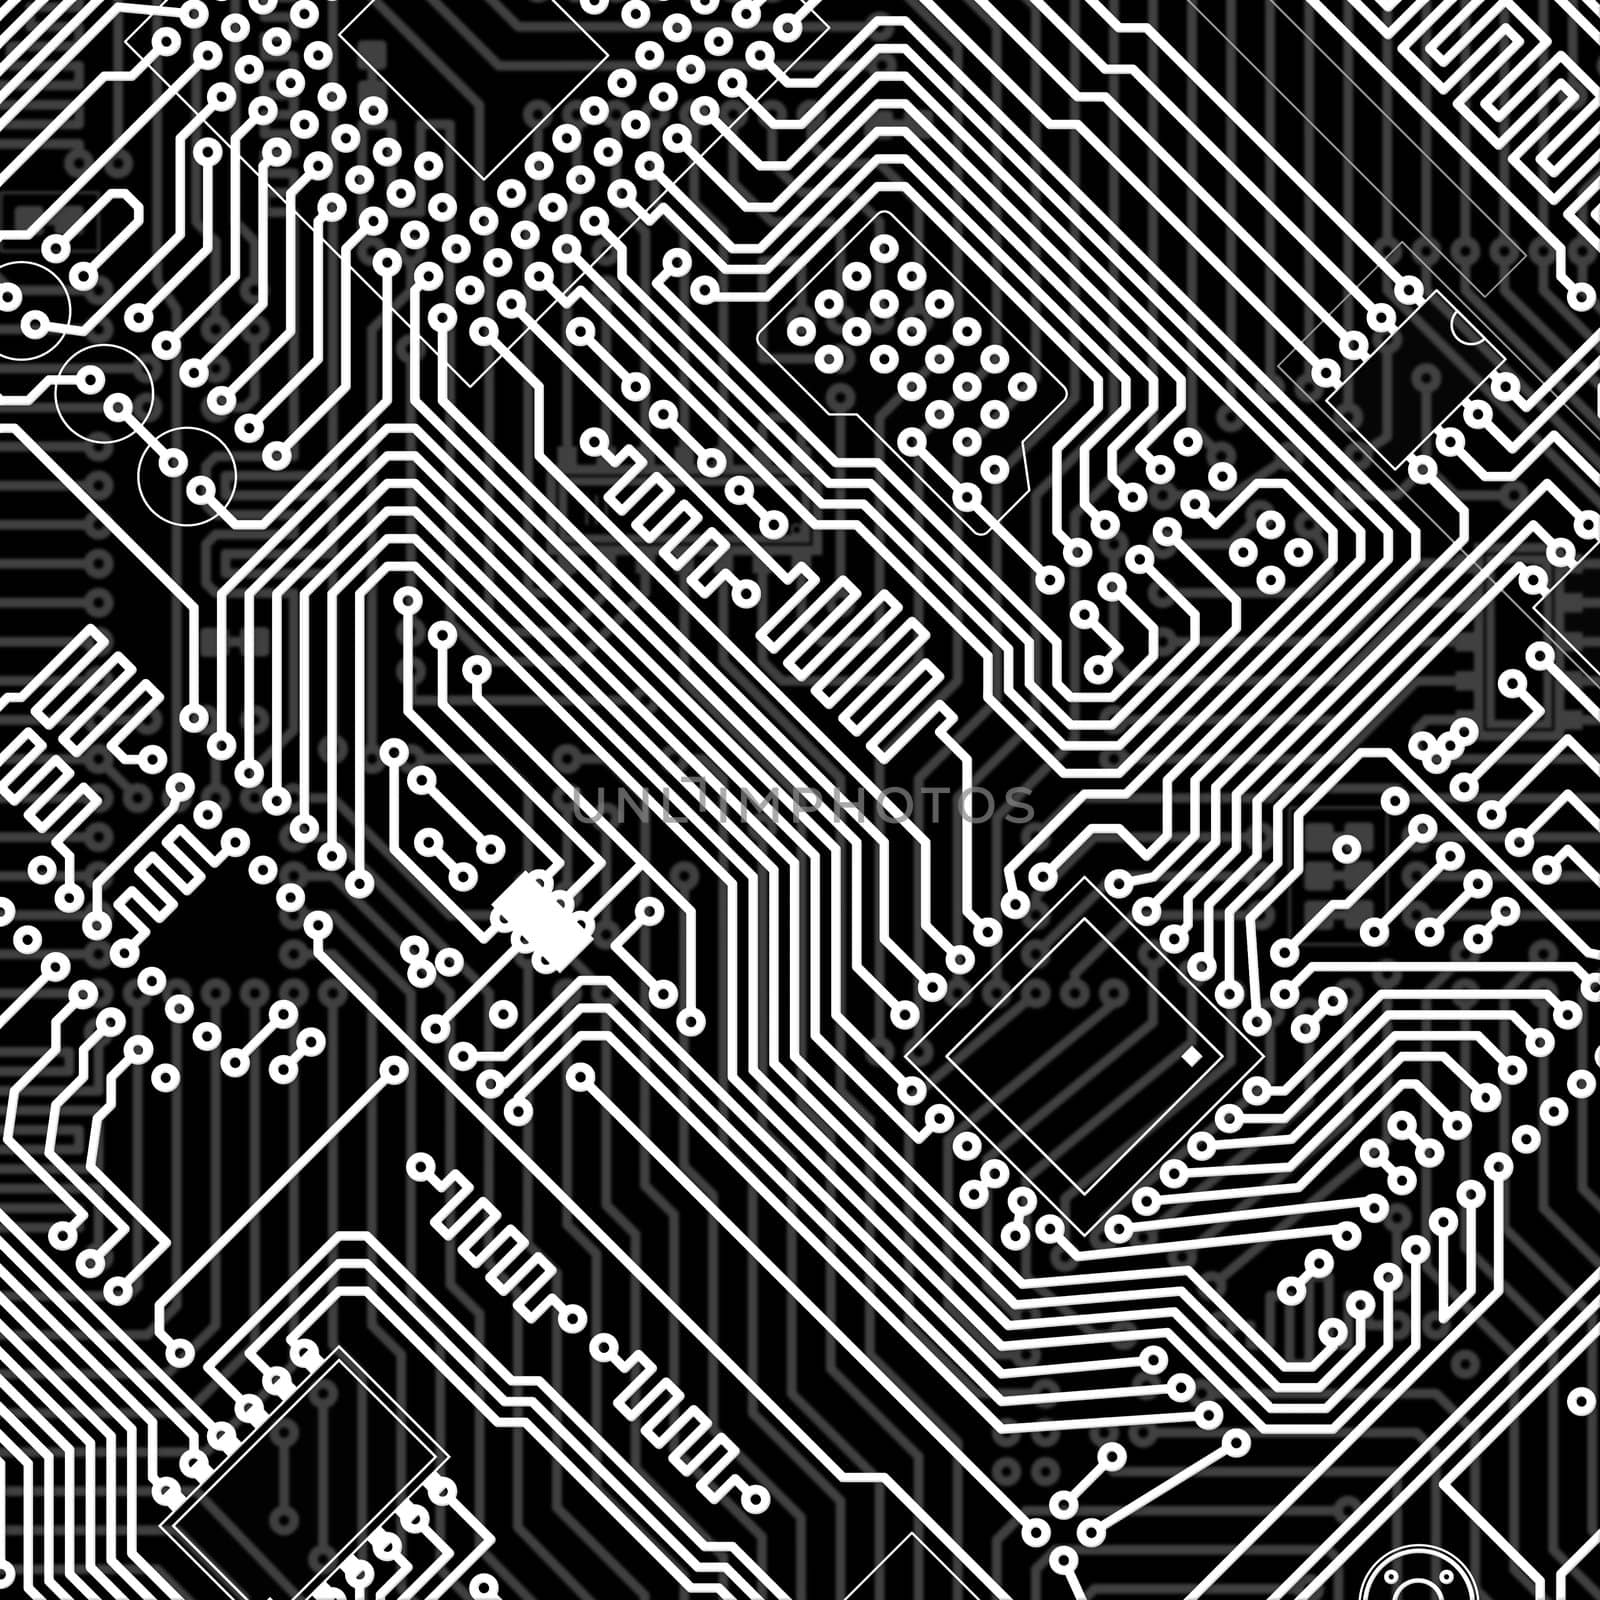 Circuit board industrial electronic monochrome background by pzaxe